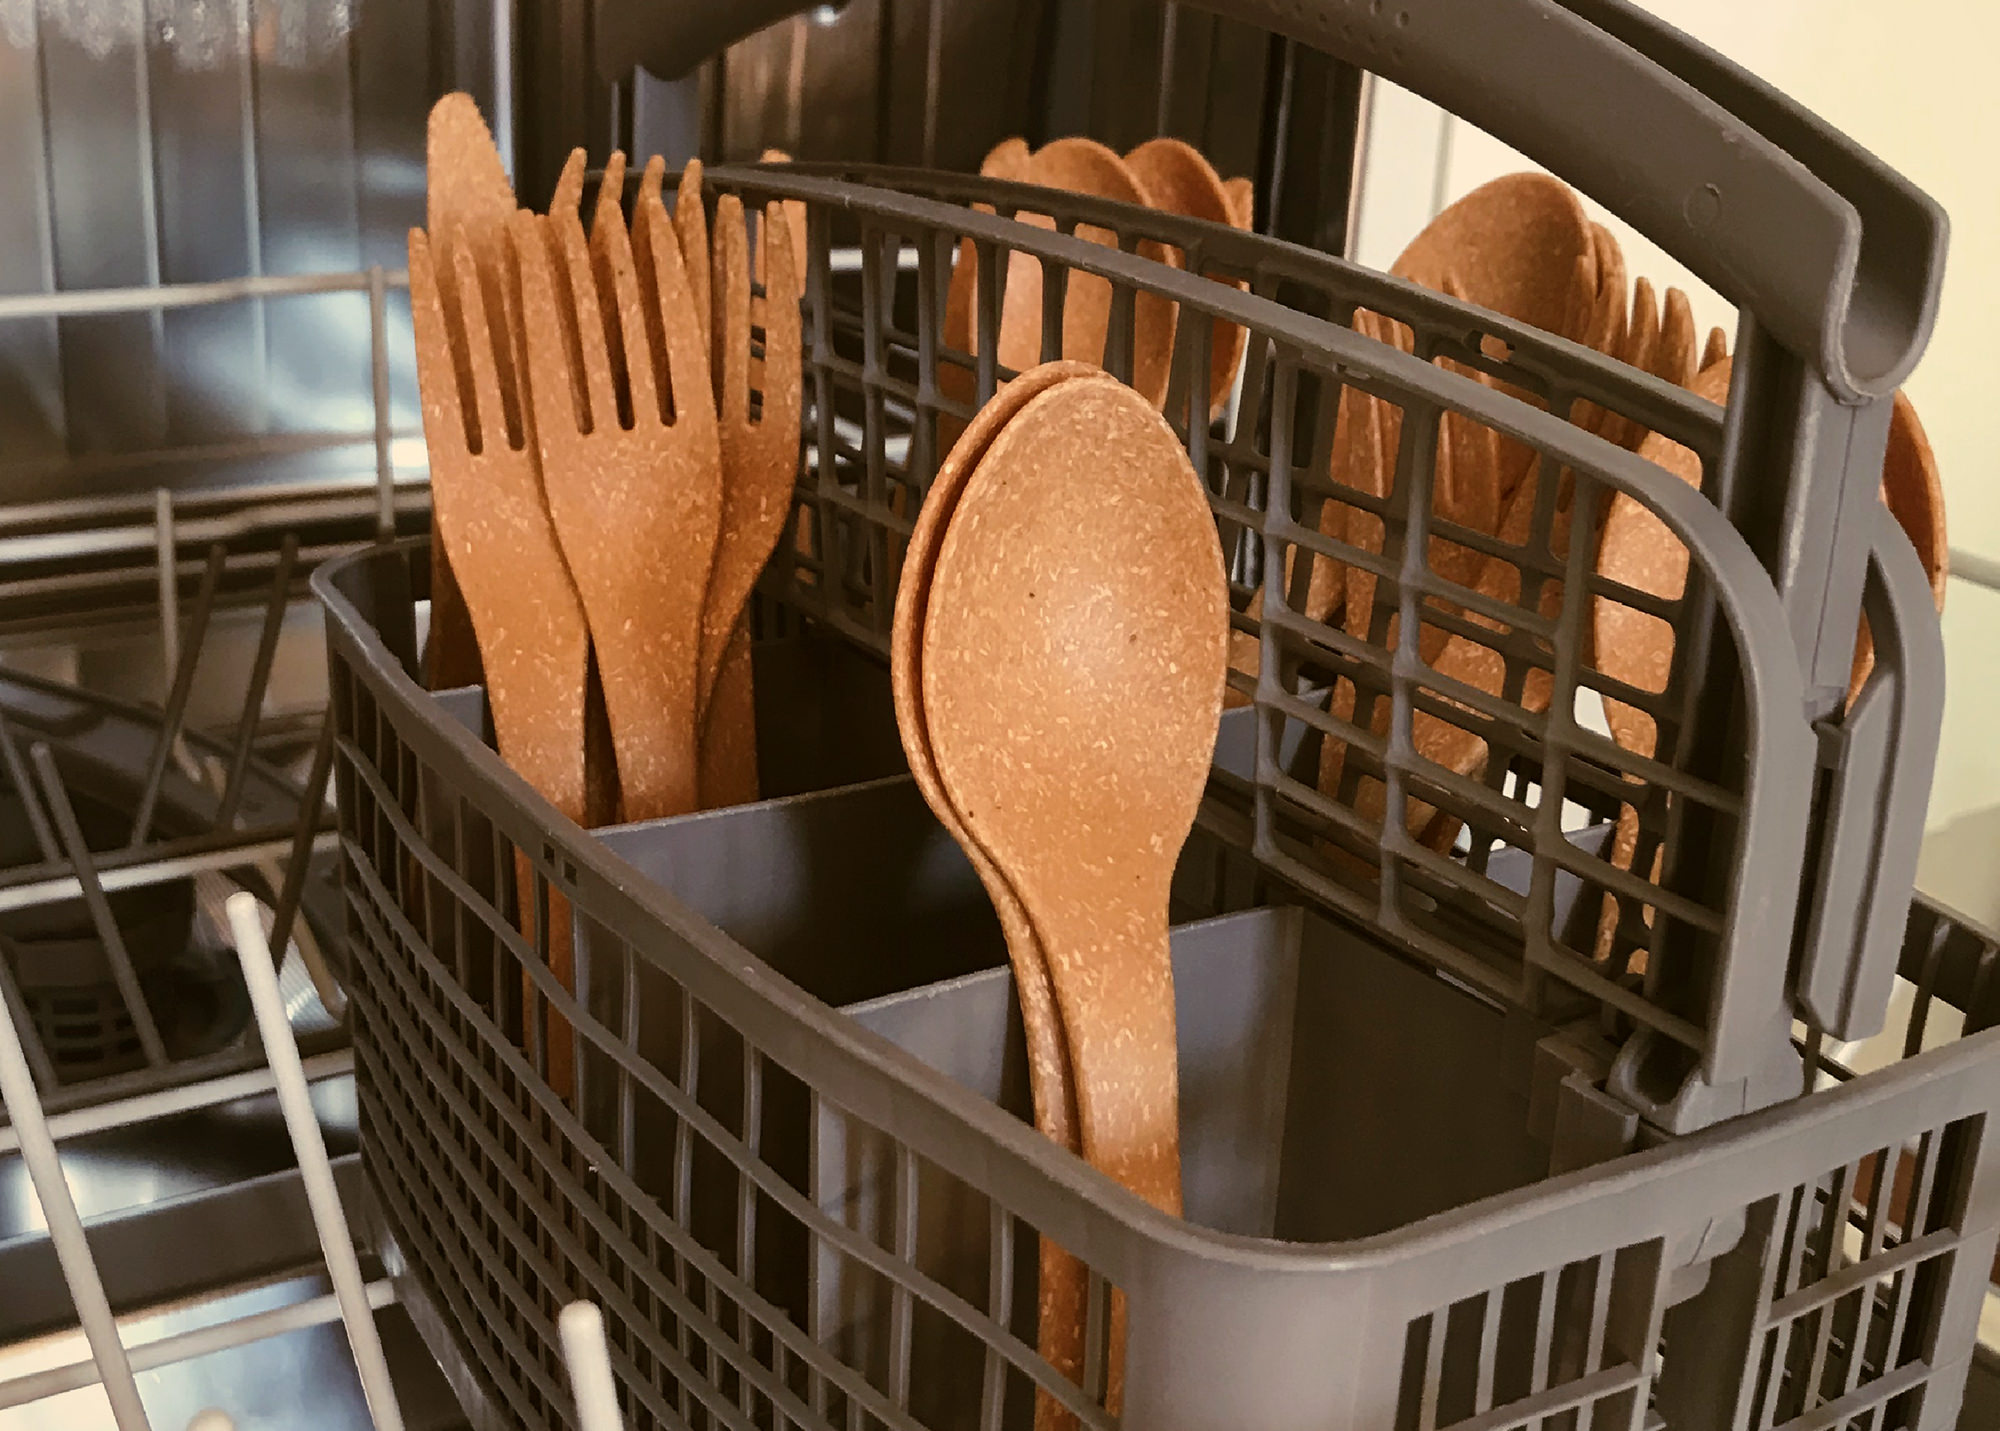 Aterin | Reusable and recyclable plastic-free cutlery